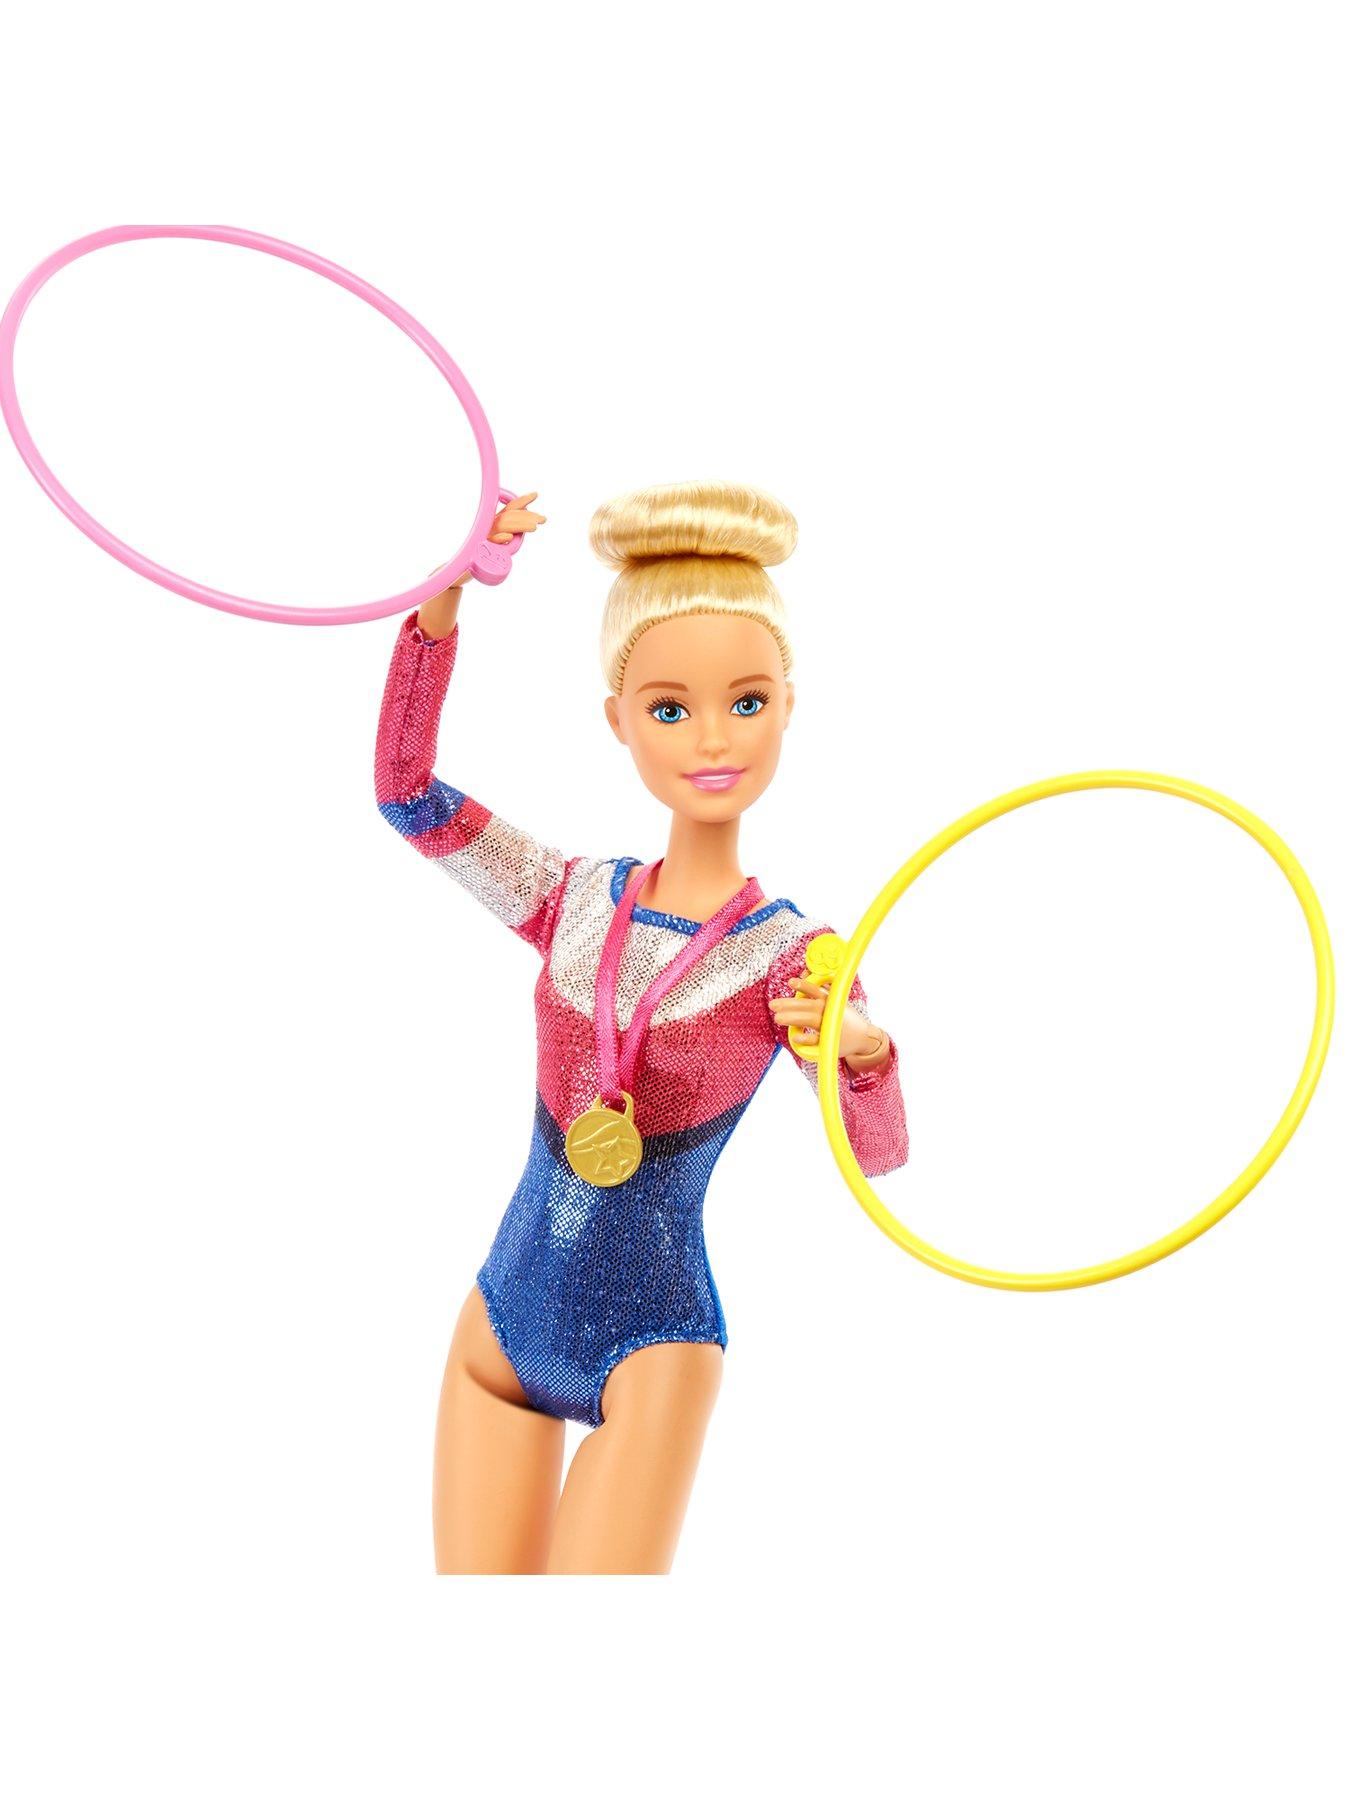 Barbie Gymnastics Doll and Playset with Twirling Feature, Balance